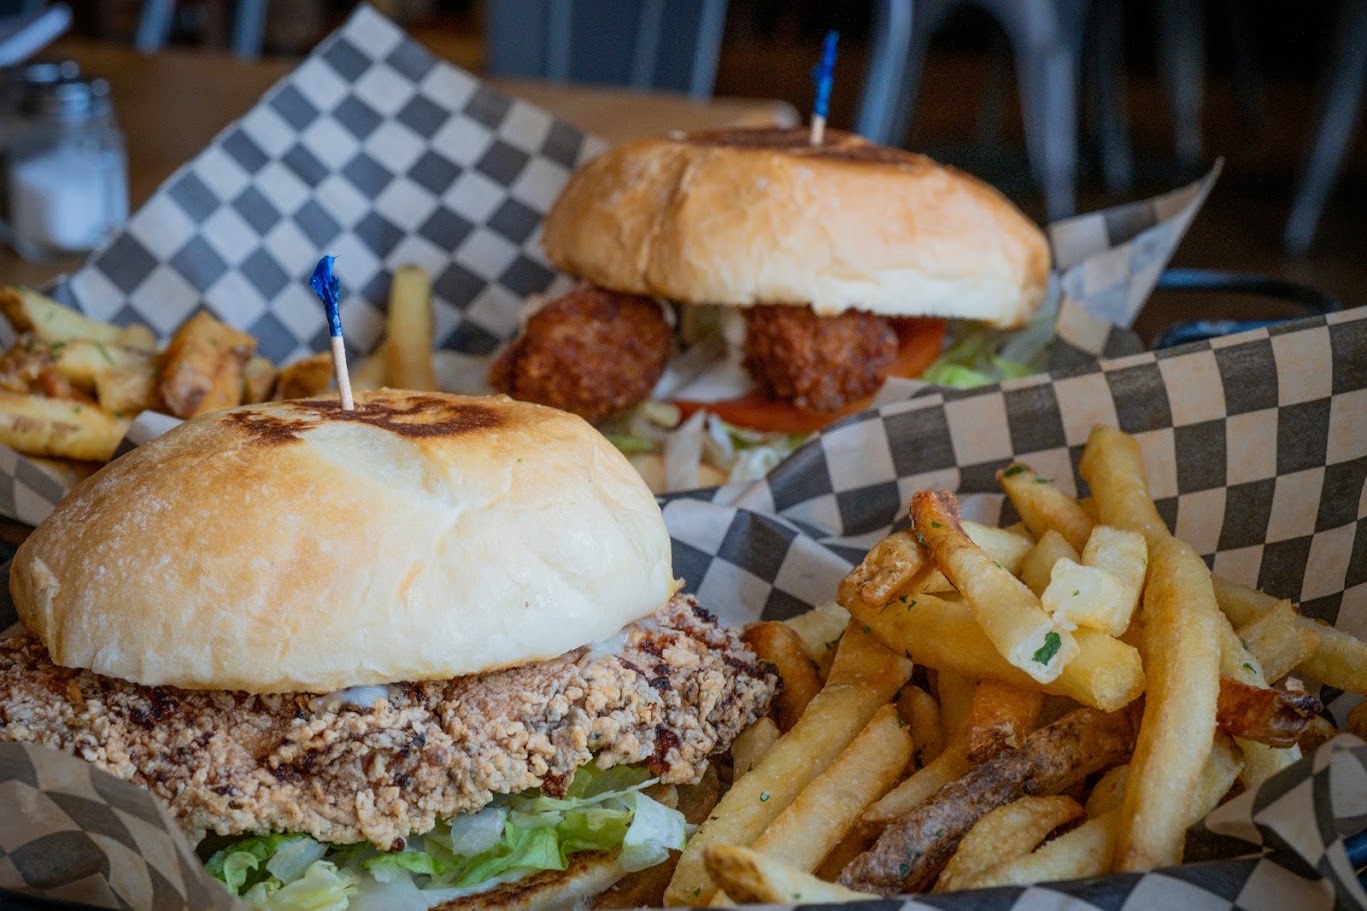 A chicken sandwich and crispy french fries are placed on a table, ready to be savored.